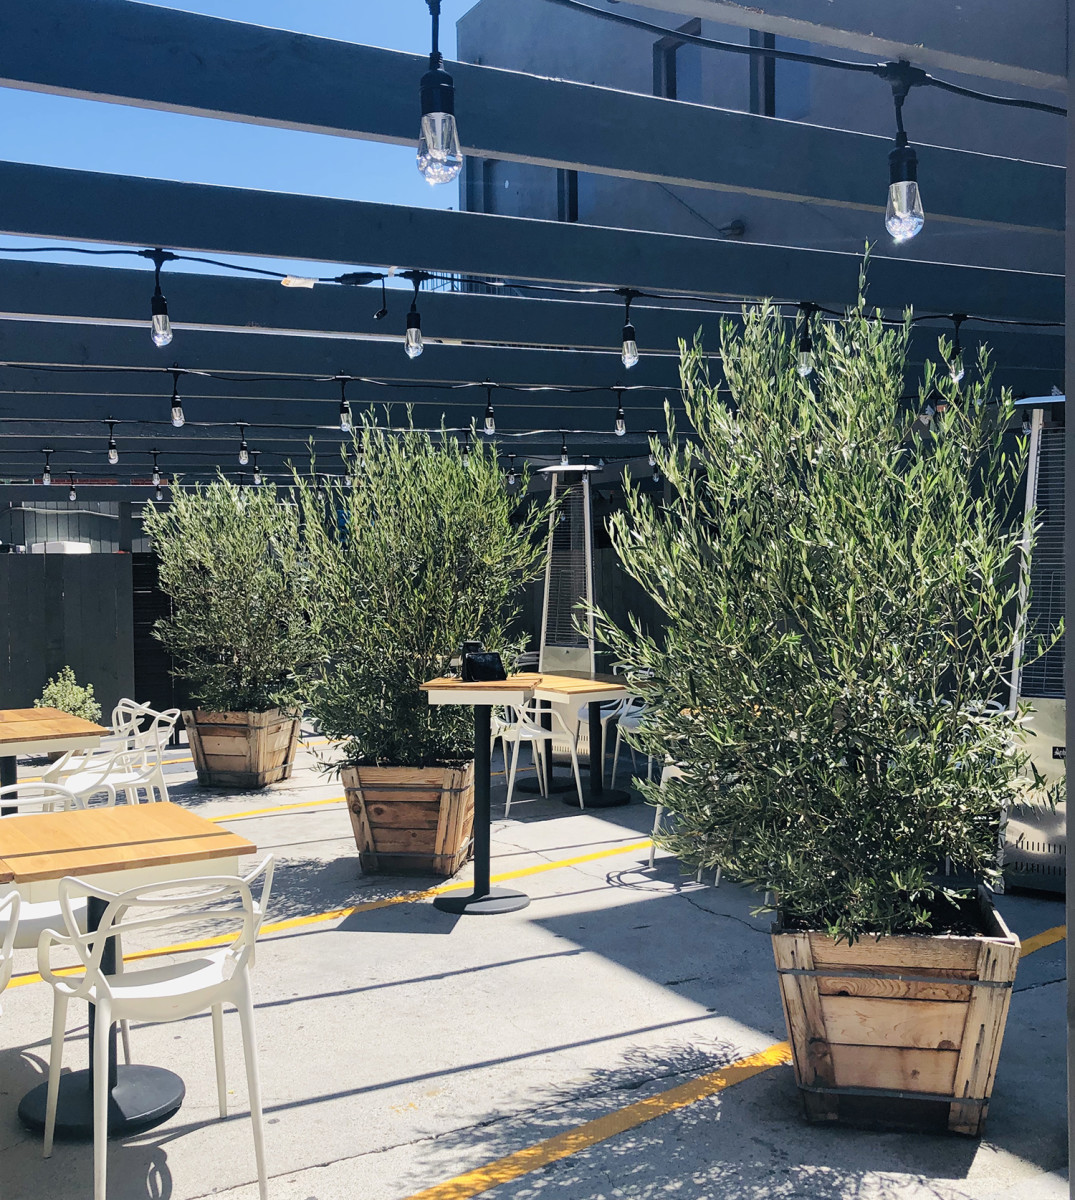 Glendale Galleria Has Turned Its Parking Garage Into An Outdoor Dining  Setup - Secret Los Angeles